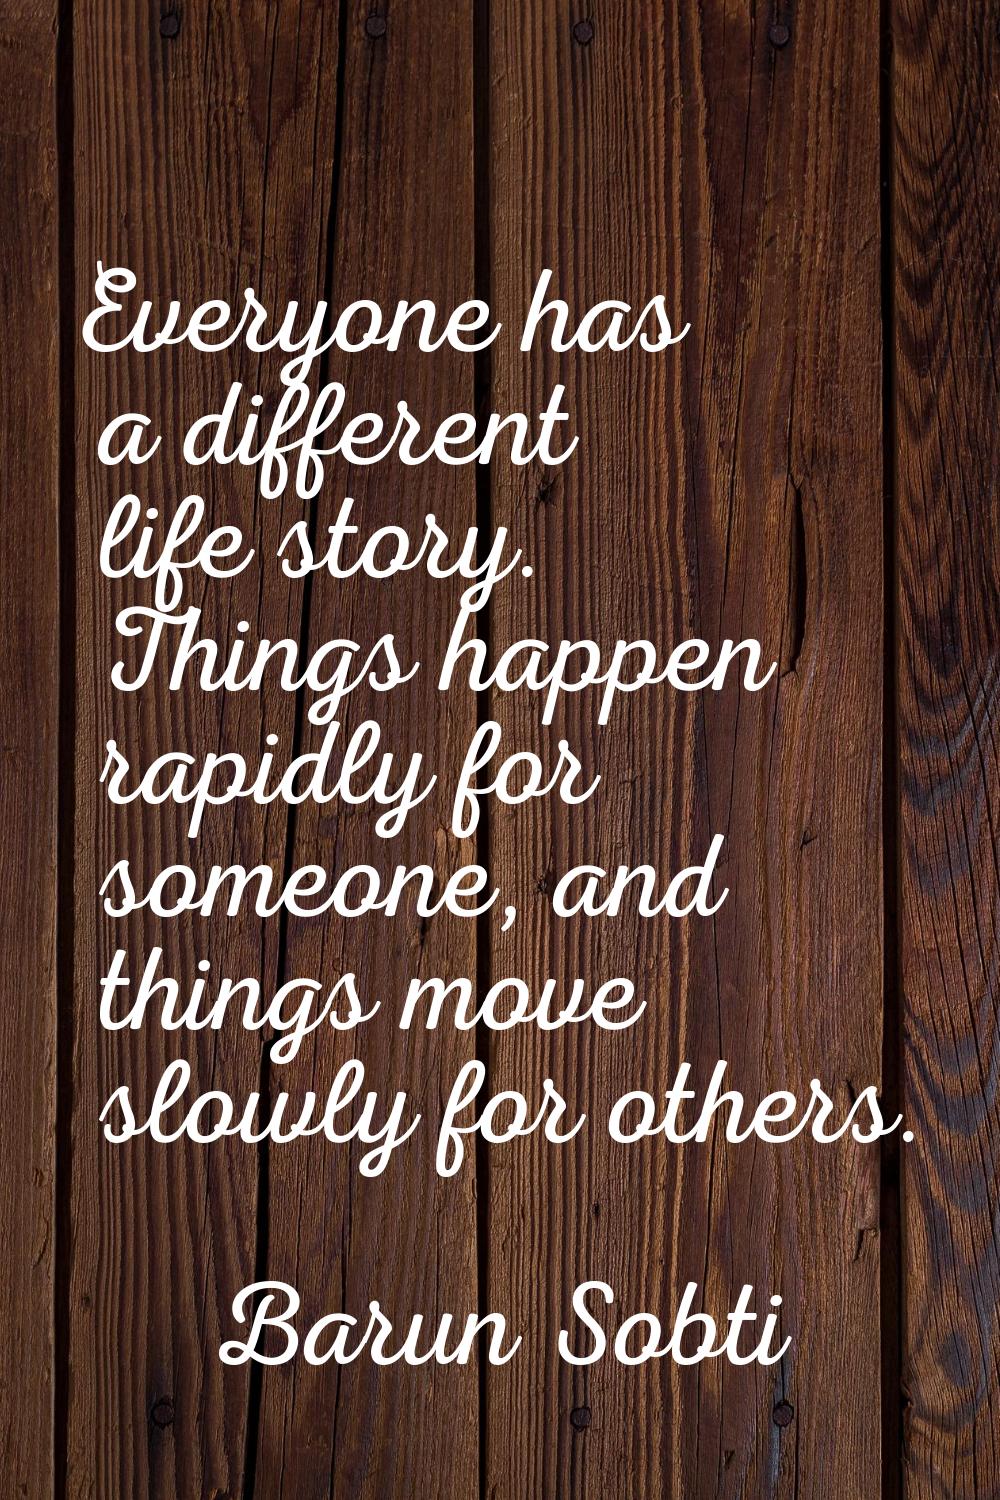 Everyone has a different life story. Things happen rapidly for someone, and things move slowly for 